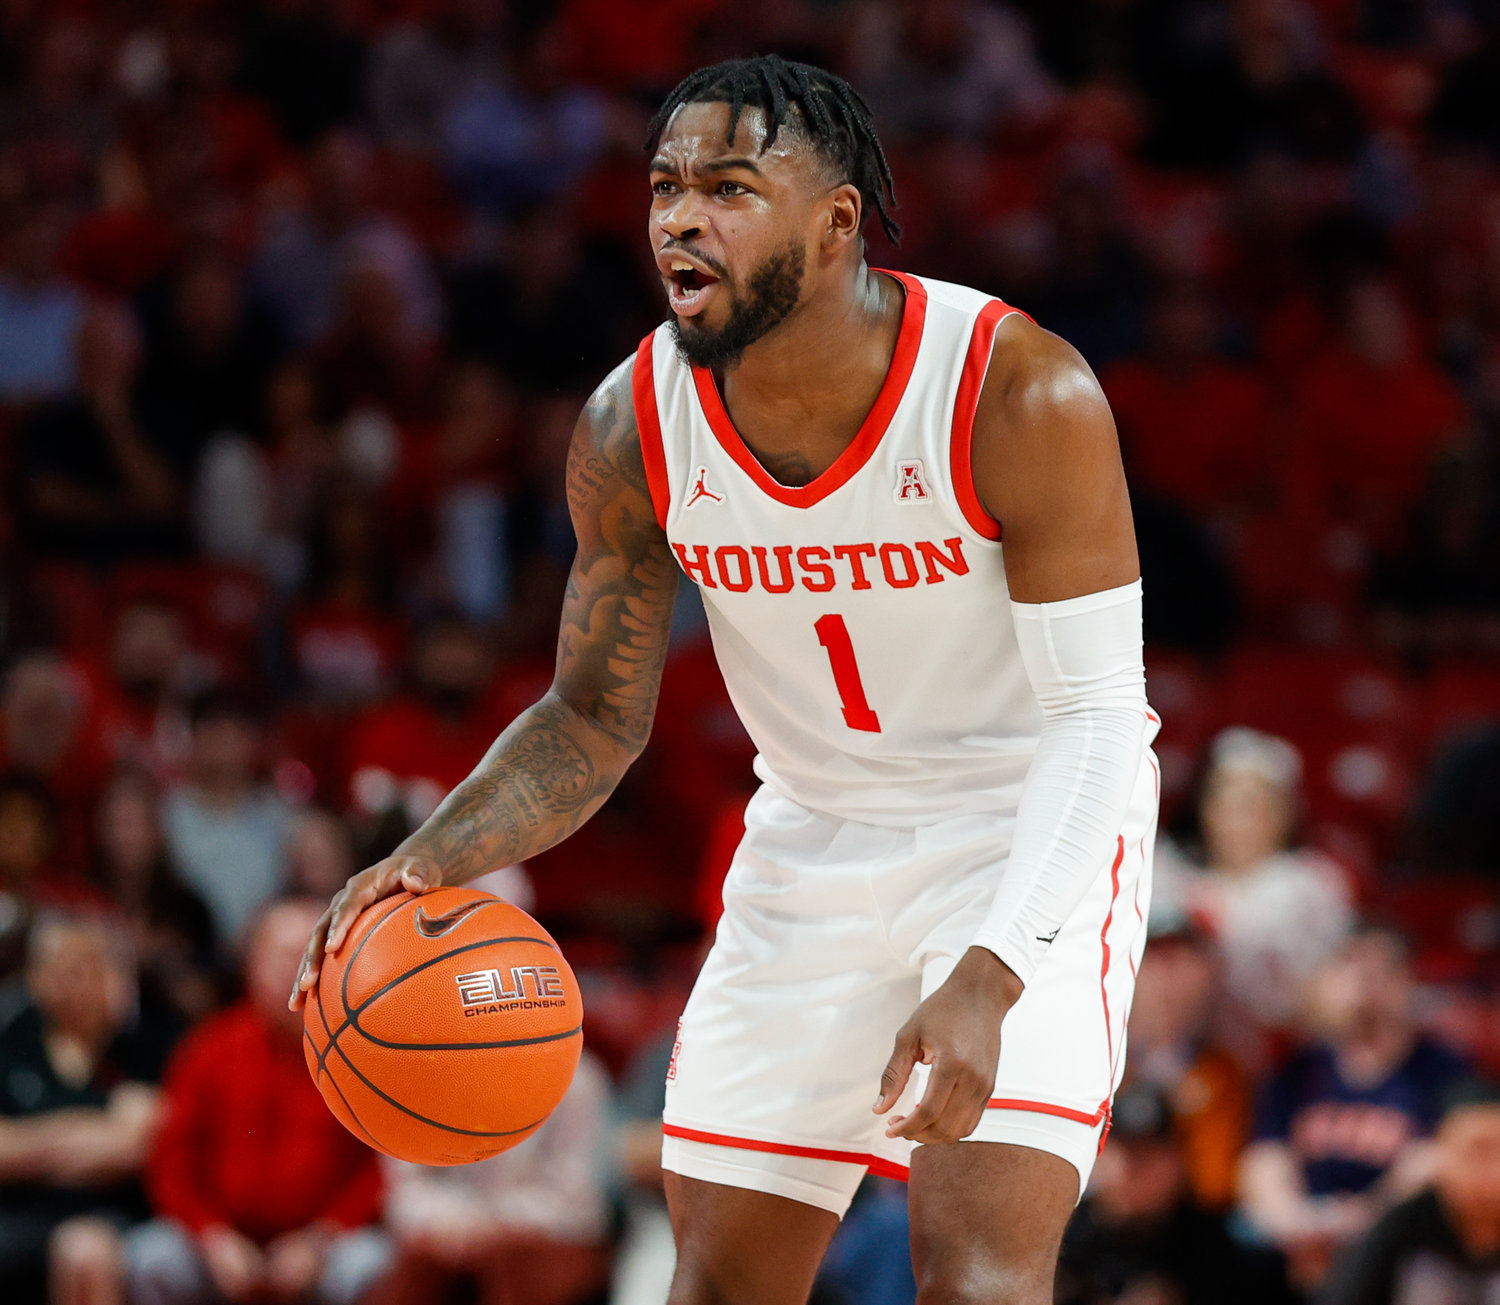 Houston guard Jamal Shead (1) calls out to his teammates during an NCAA men’s basketball game between the Houston Cougars and the Southern Methodist Mustangs on Jan. 5, 2023 in Houston. Houston won, 87-53,